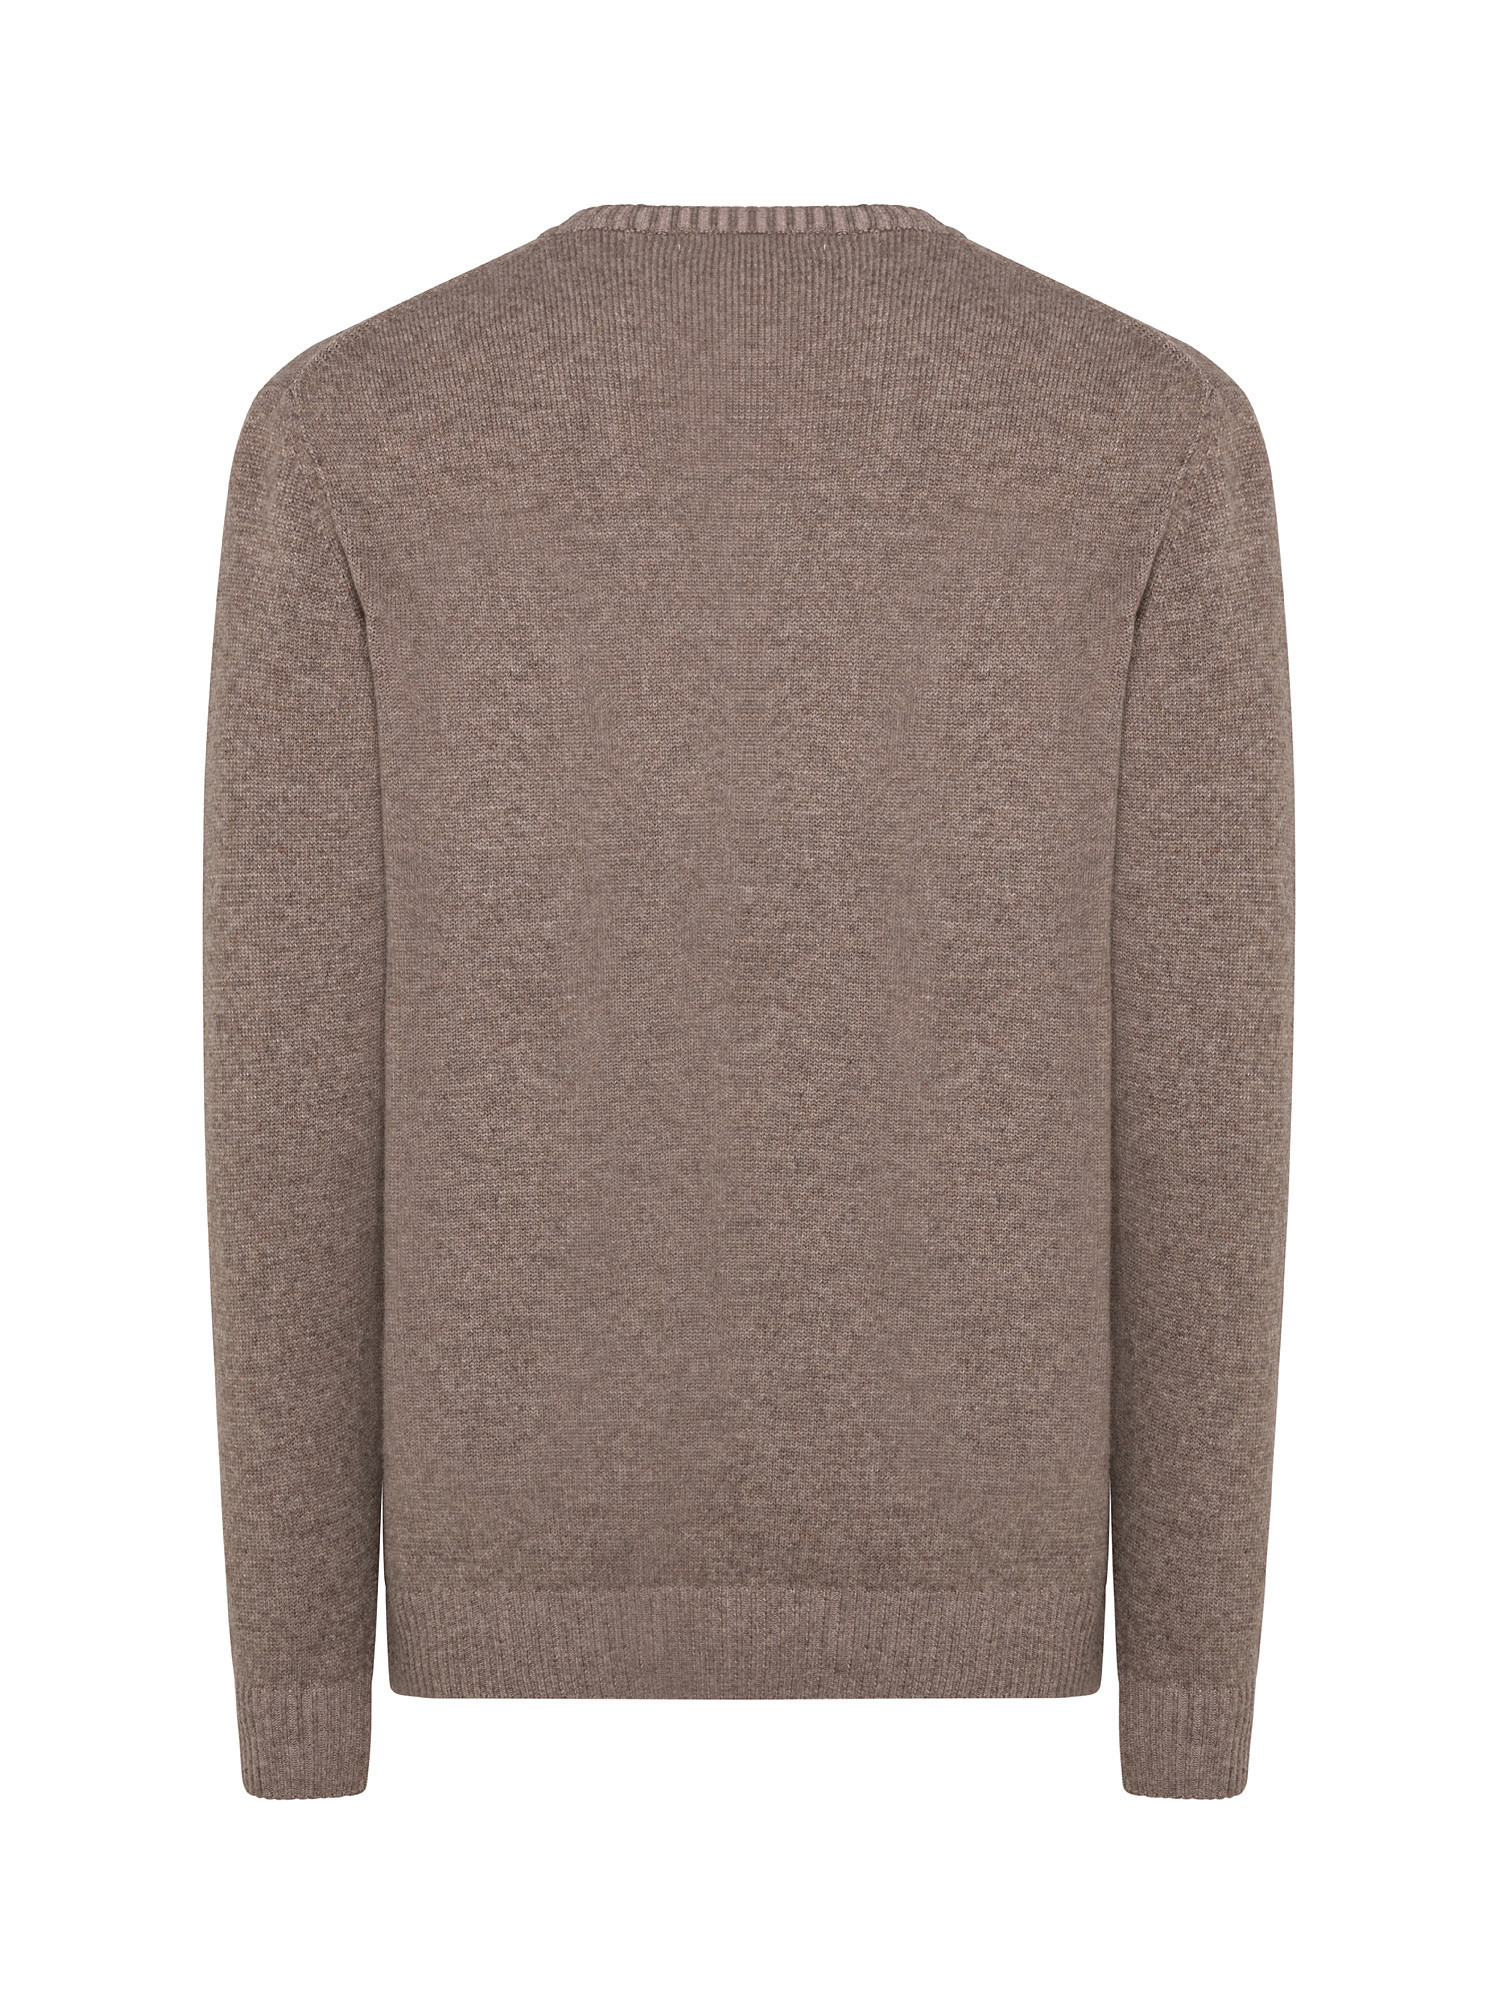 Pullover girocollo, Beige, large image number 1